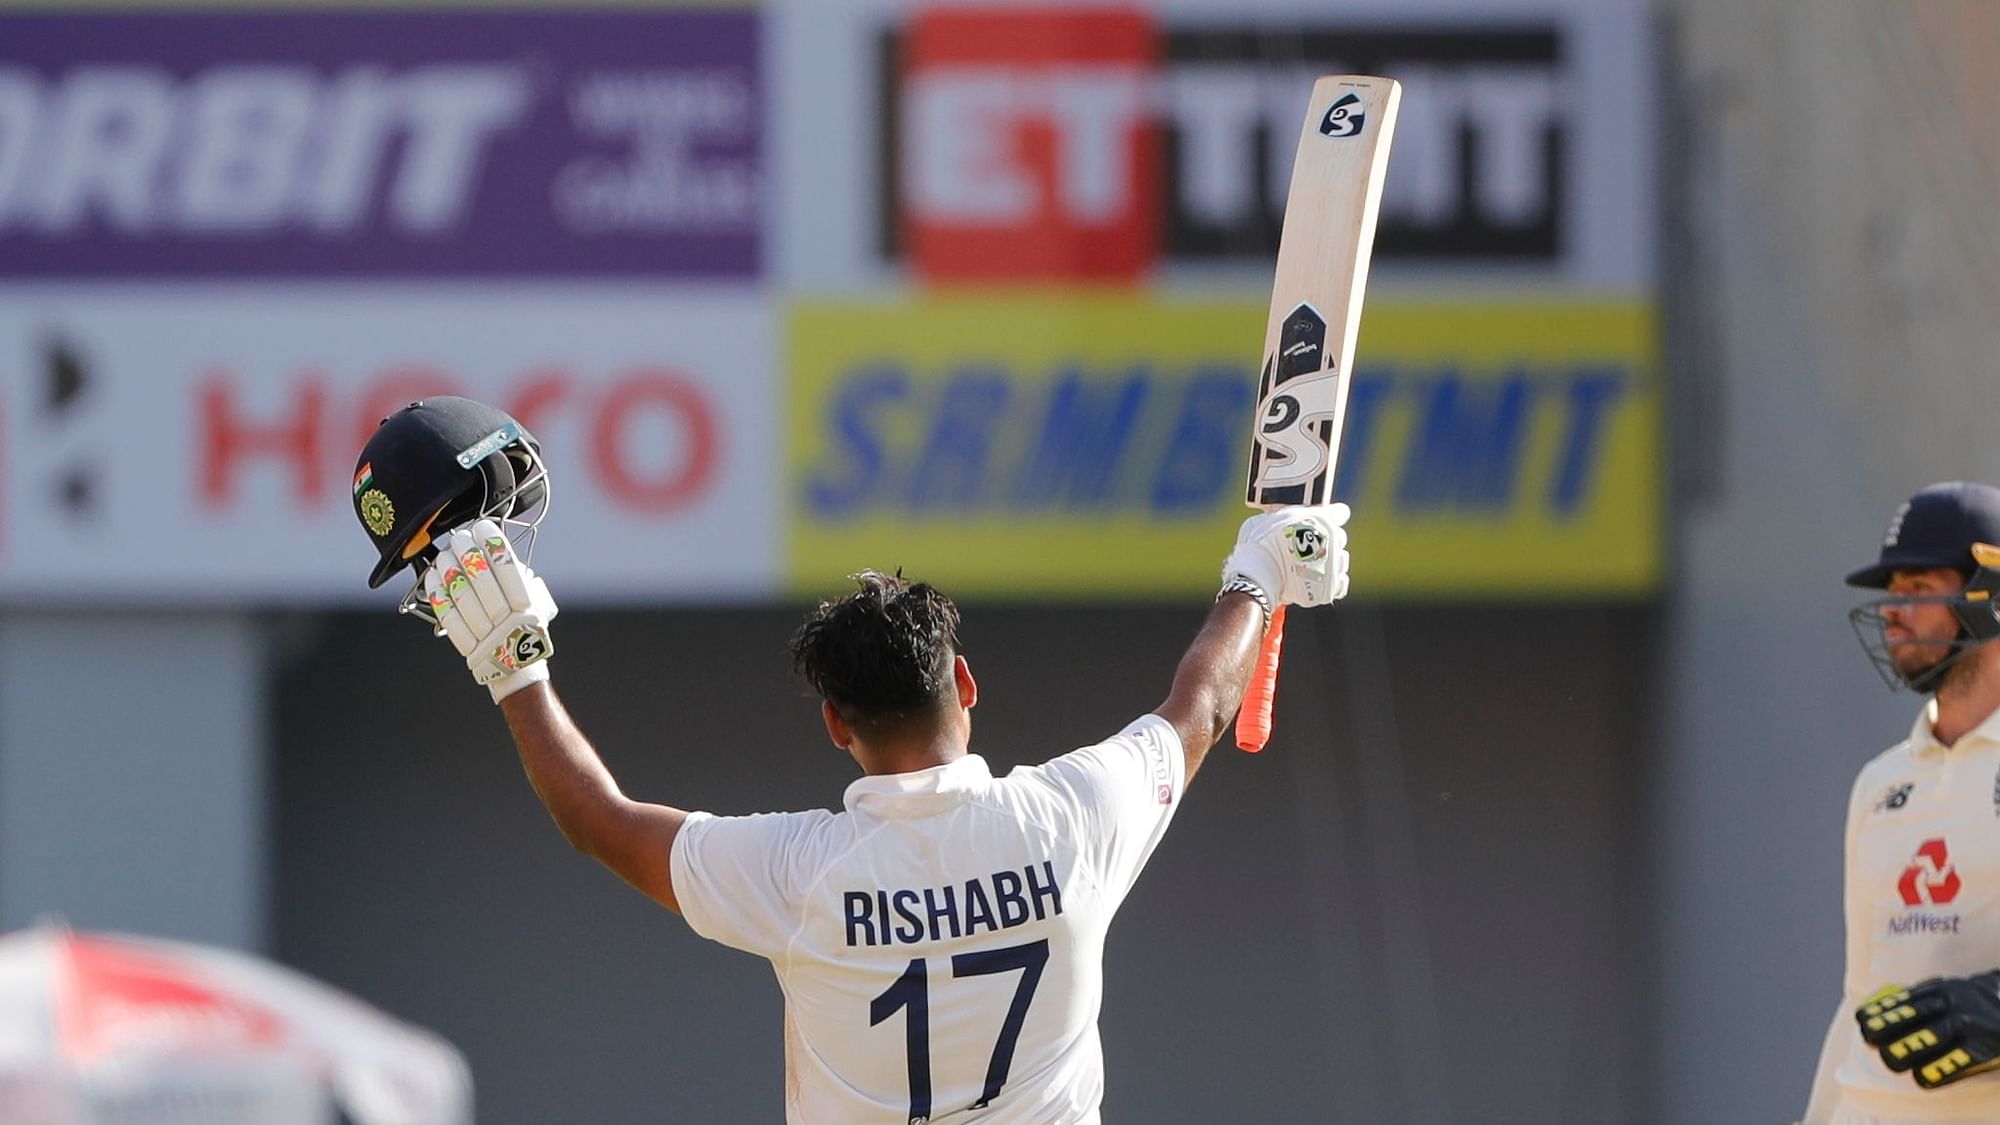 Rishabh Pant celebrates his century on Day 2 of the 4th Test against England.&nbsp;